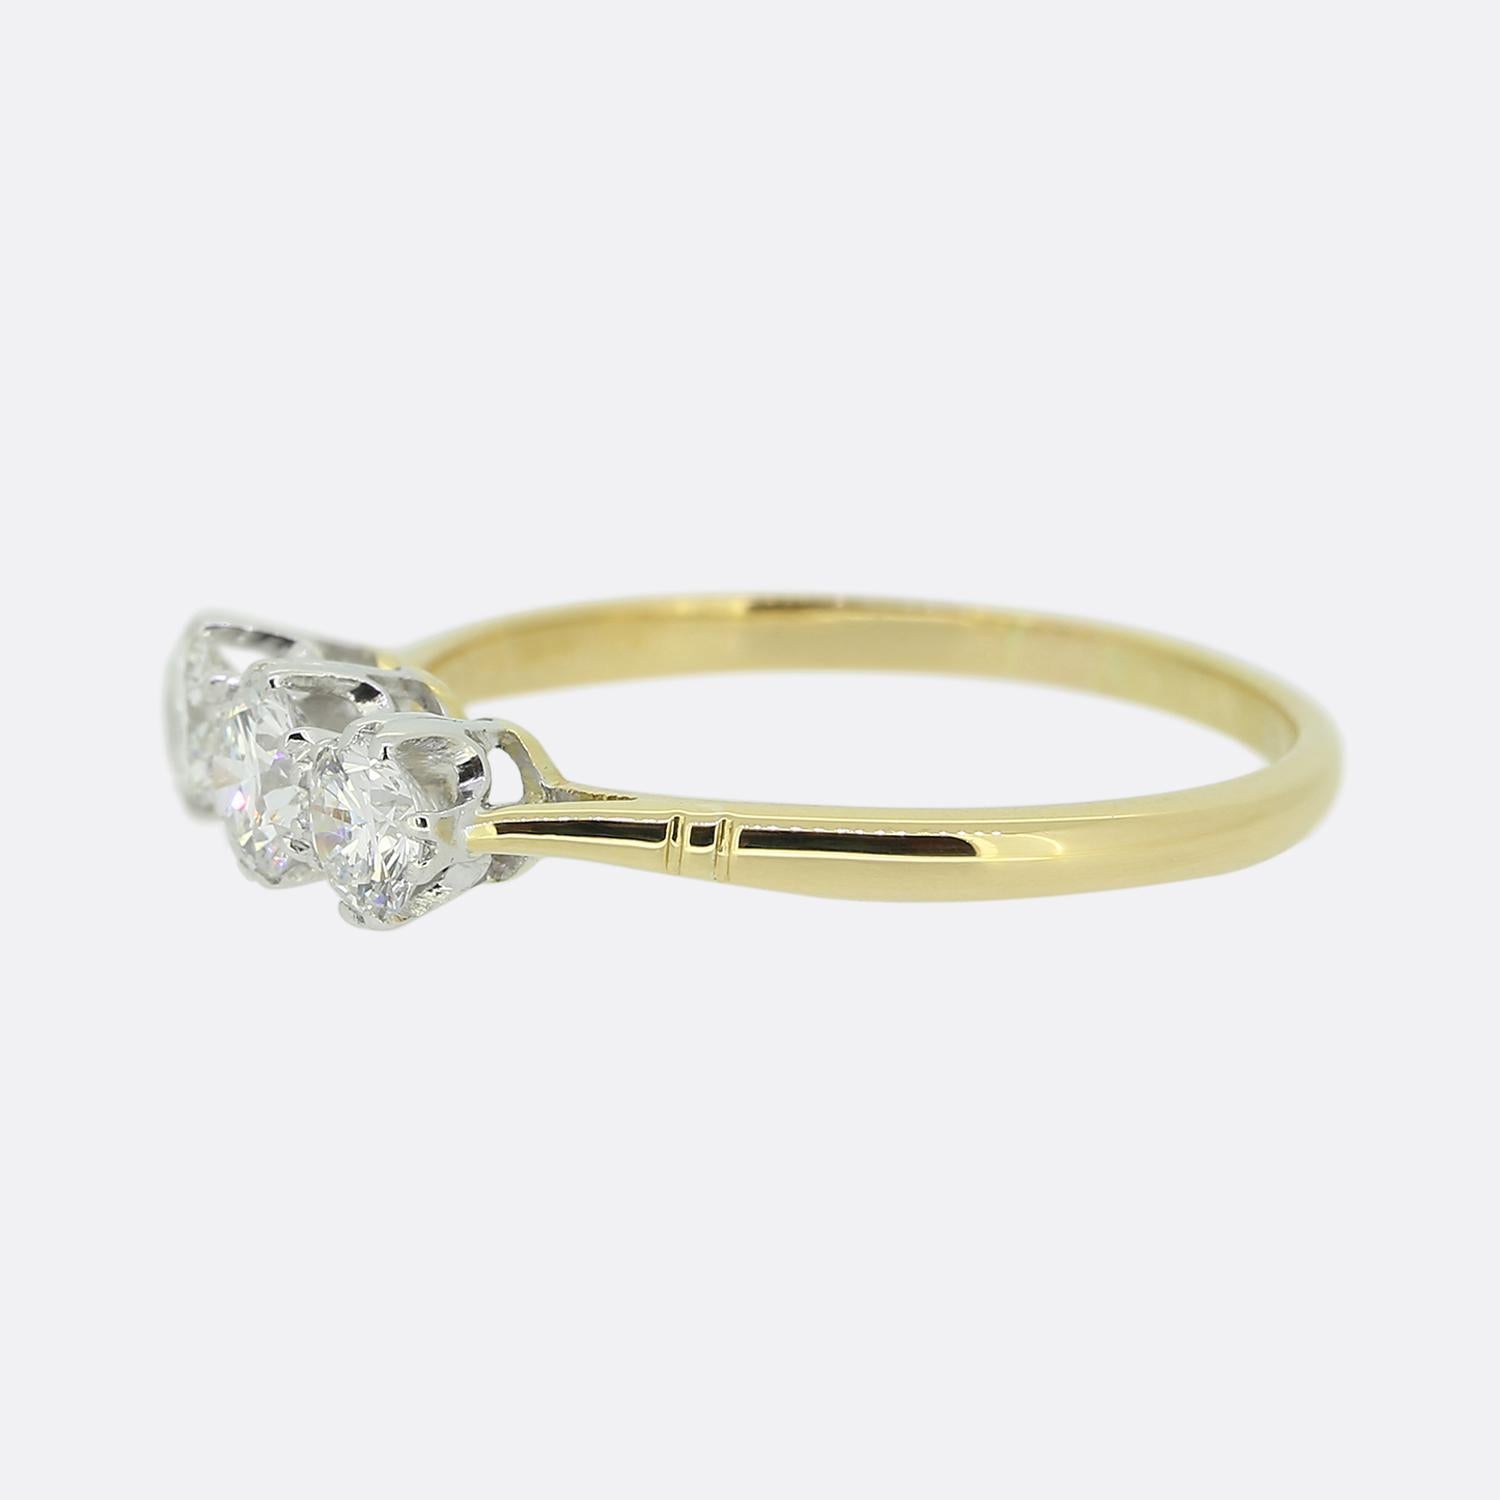 Here we have a lovely, classically styled three-stone ring. A trio of well matched round brilliant cut diamonds have been individually claw set in white gold across the centre of the face in a single line formation atop a slim 18ct yellow gold band.